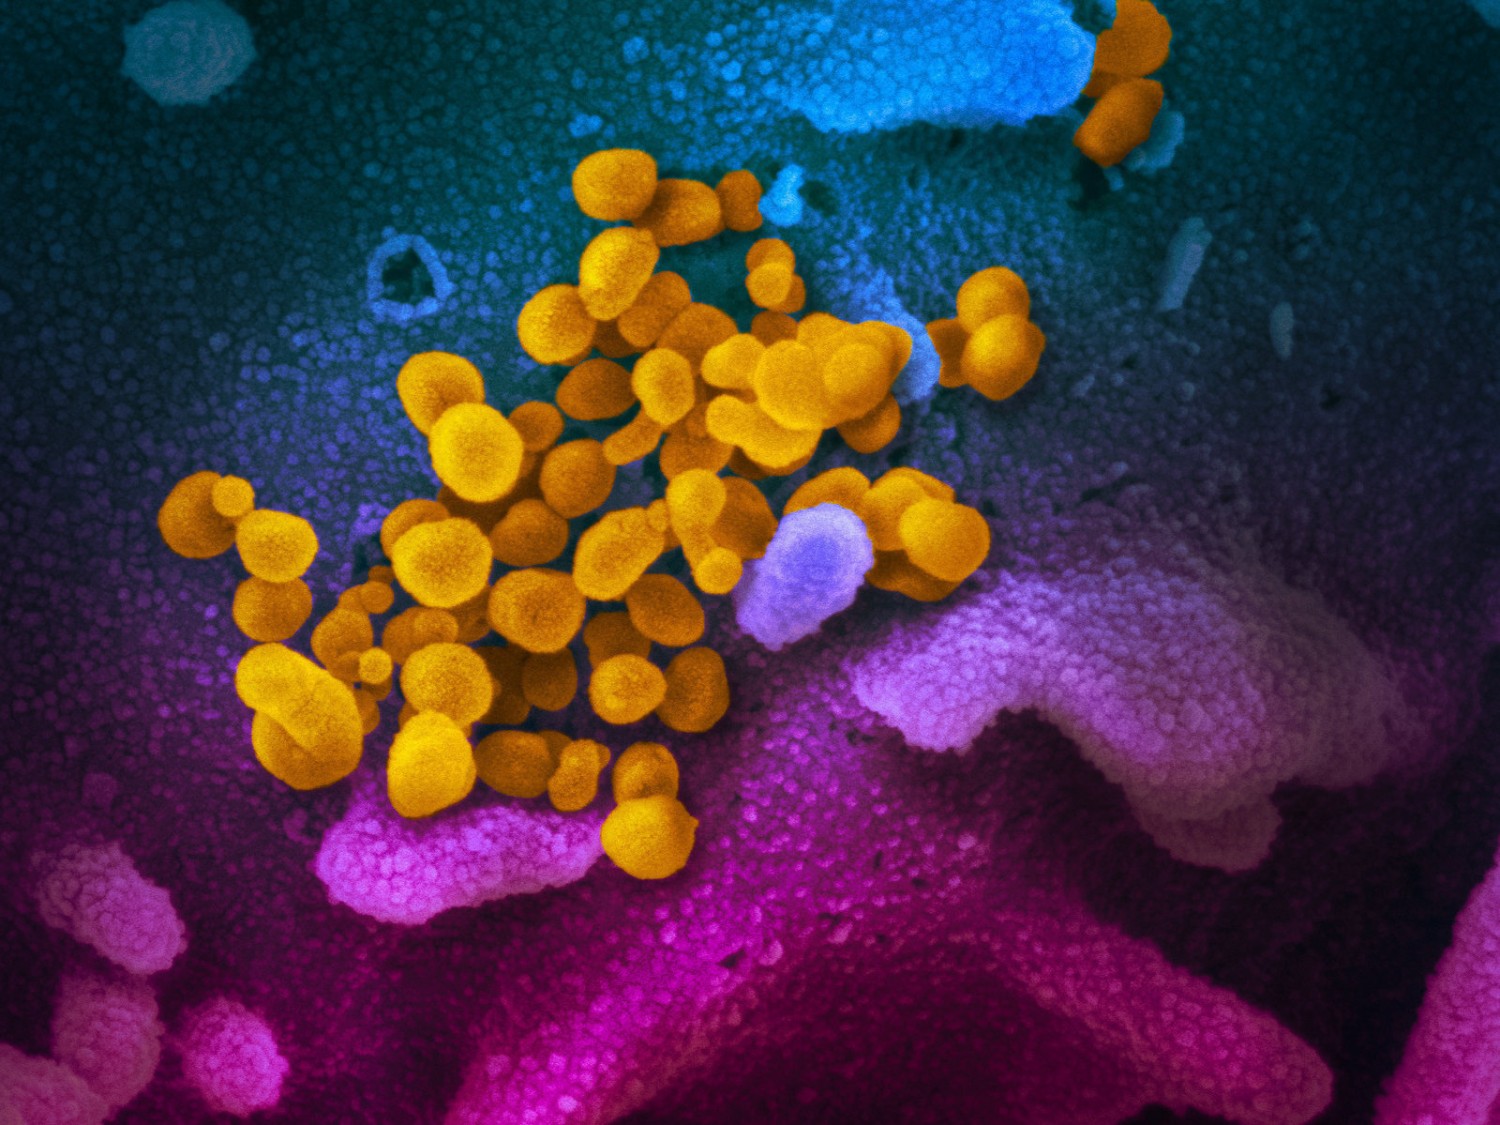 The coronavirus that causes COVID-19 is seen in yellow, emerging from cells (in blue and pink) cultured in the lab. This image is from a scanning electron microscope. NIAID-RML